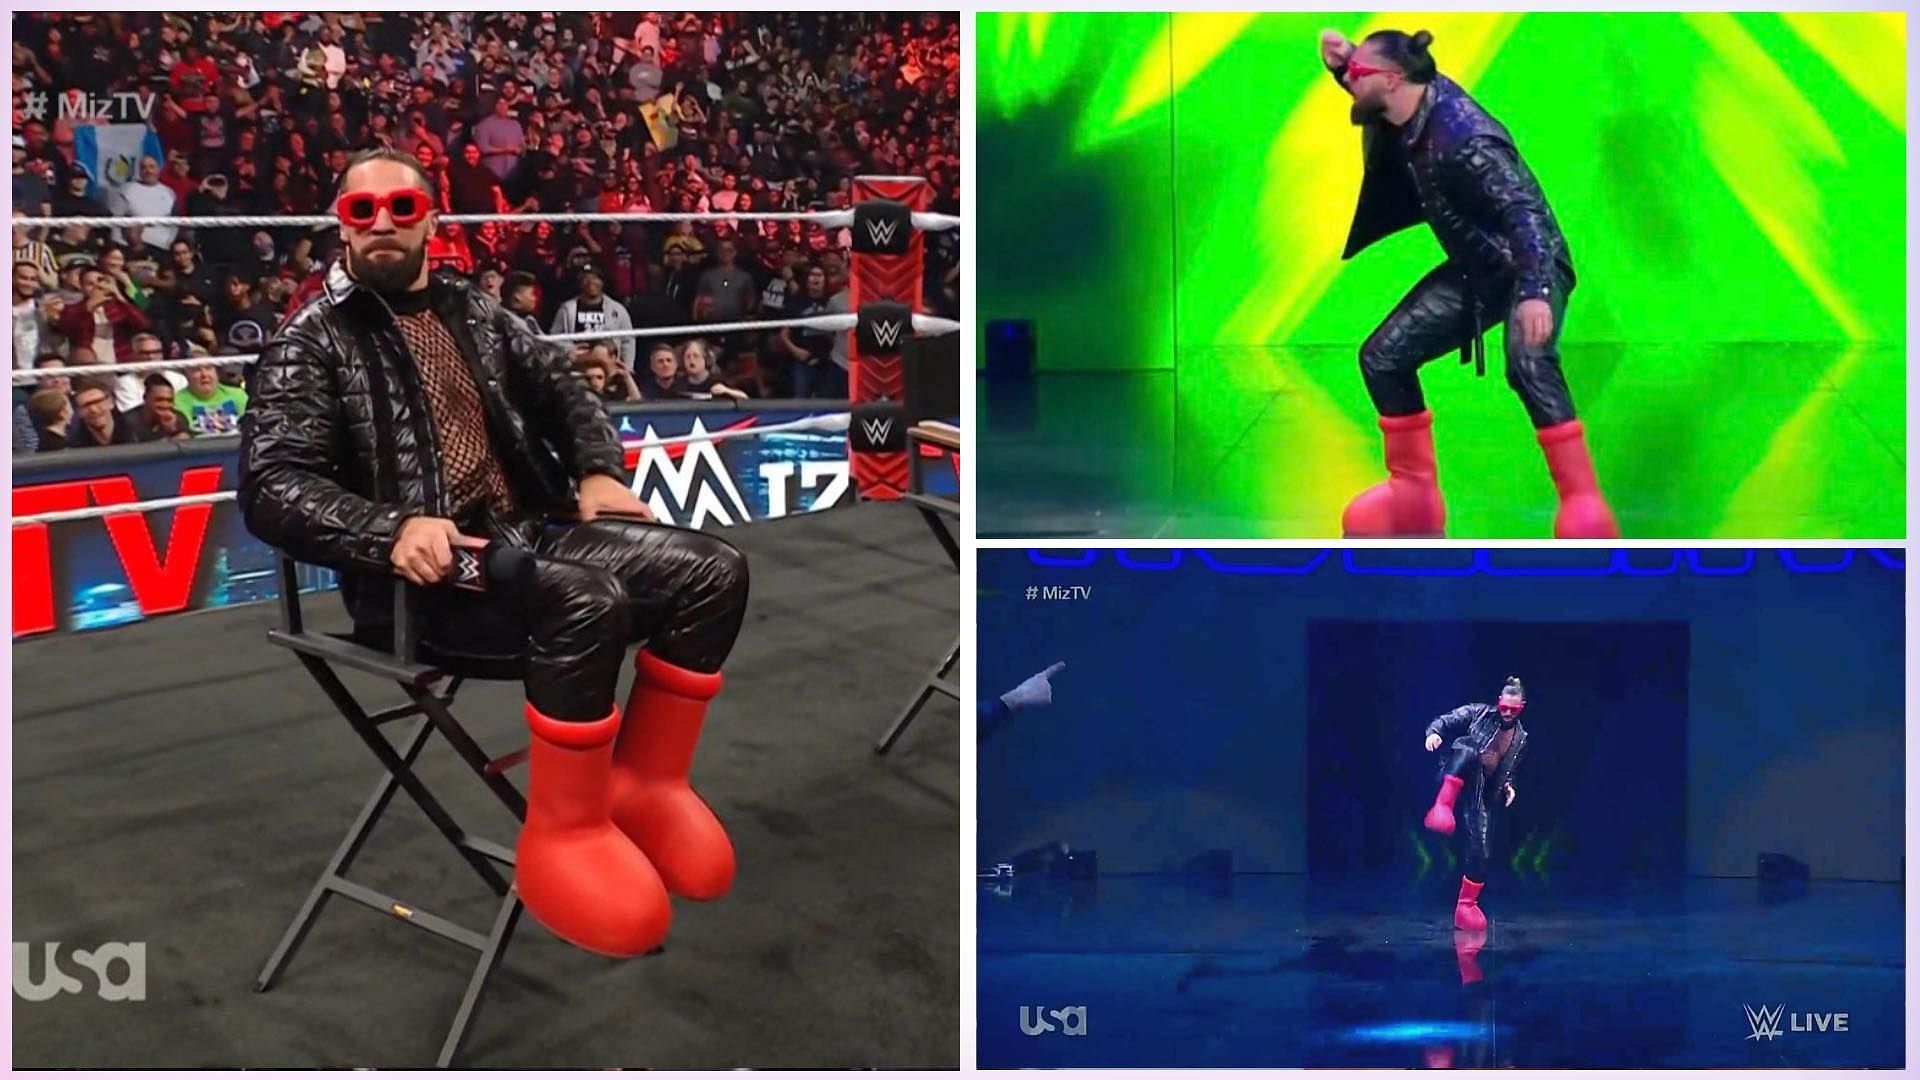 WWE RAW Superstar Seth Rollins rocking the viral red boots